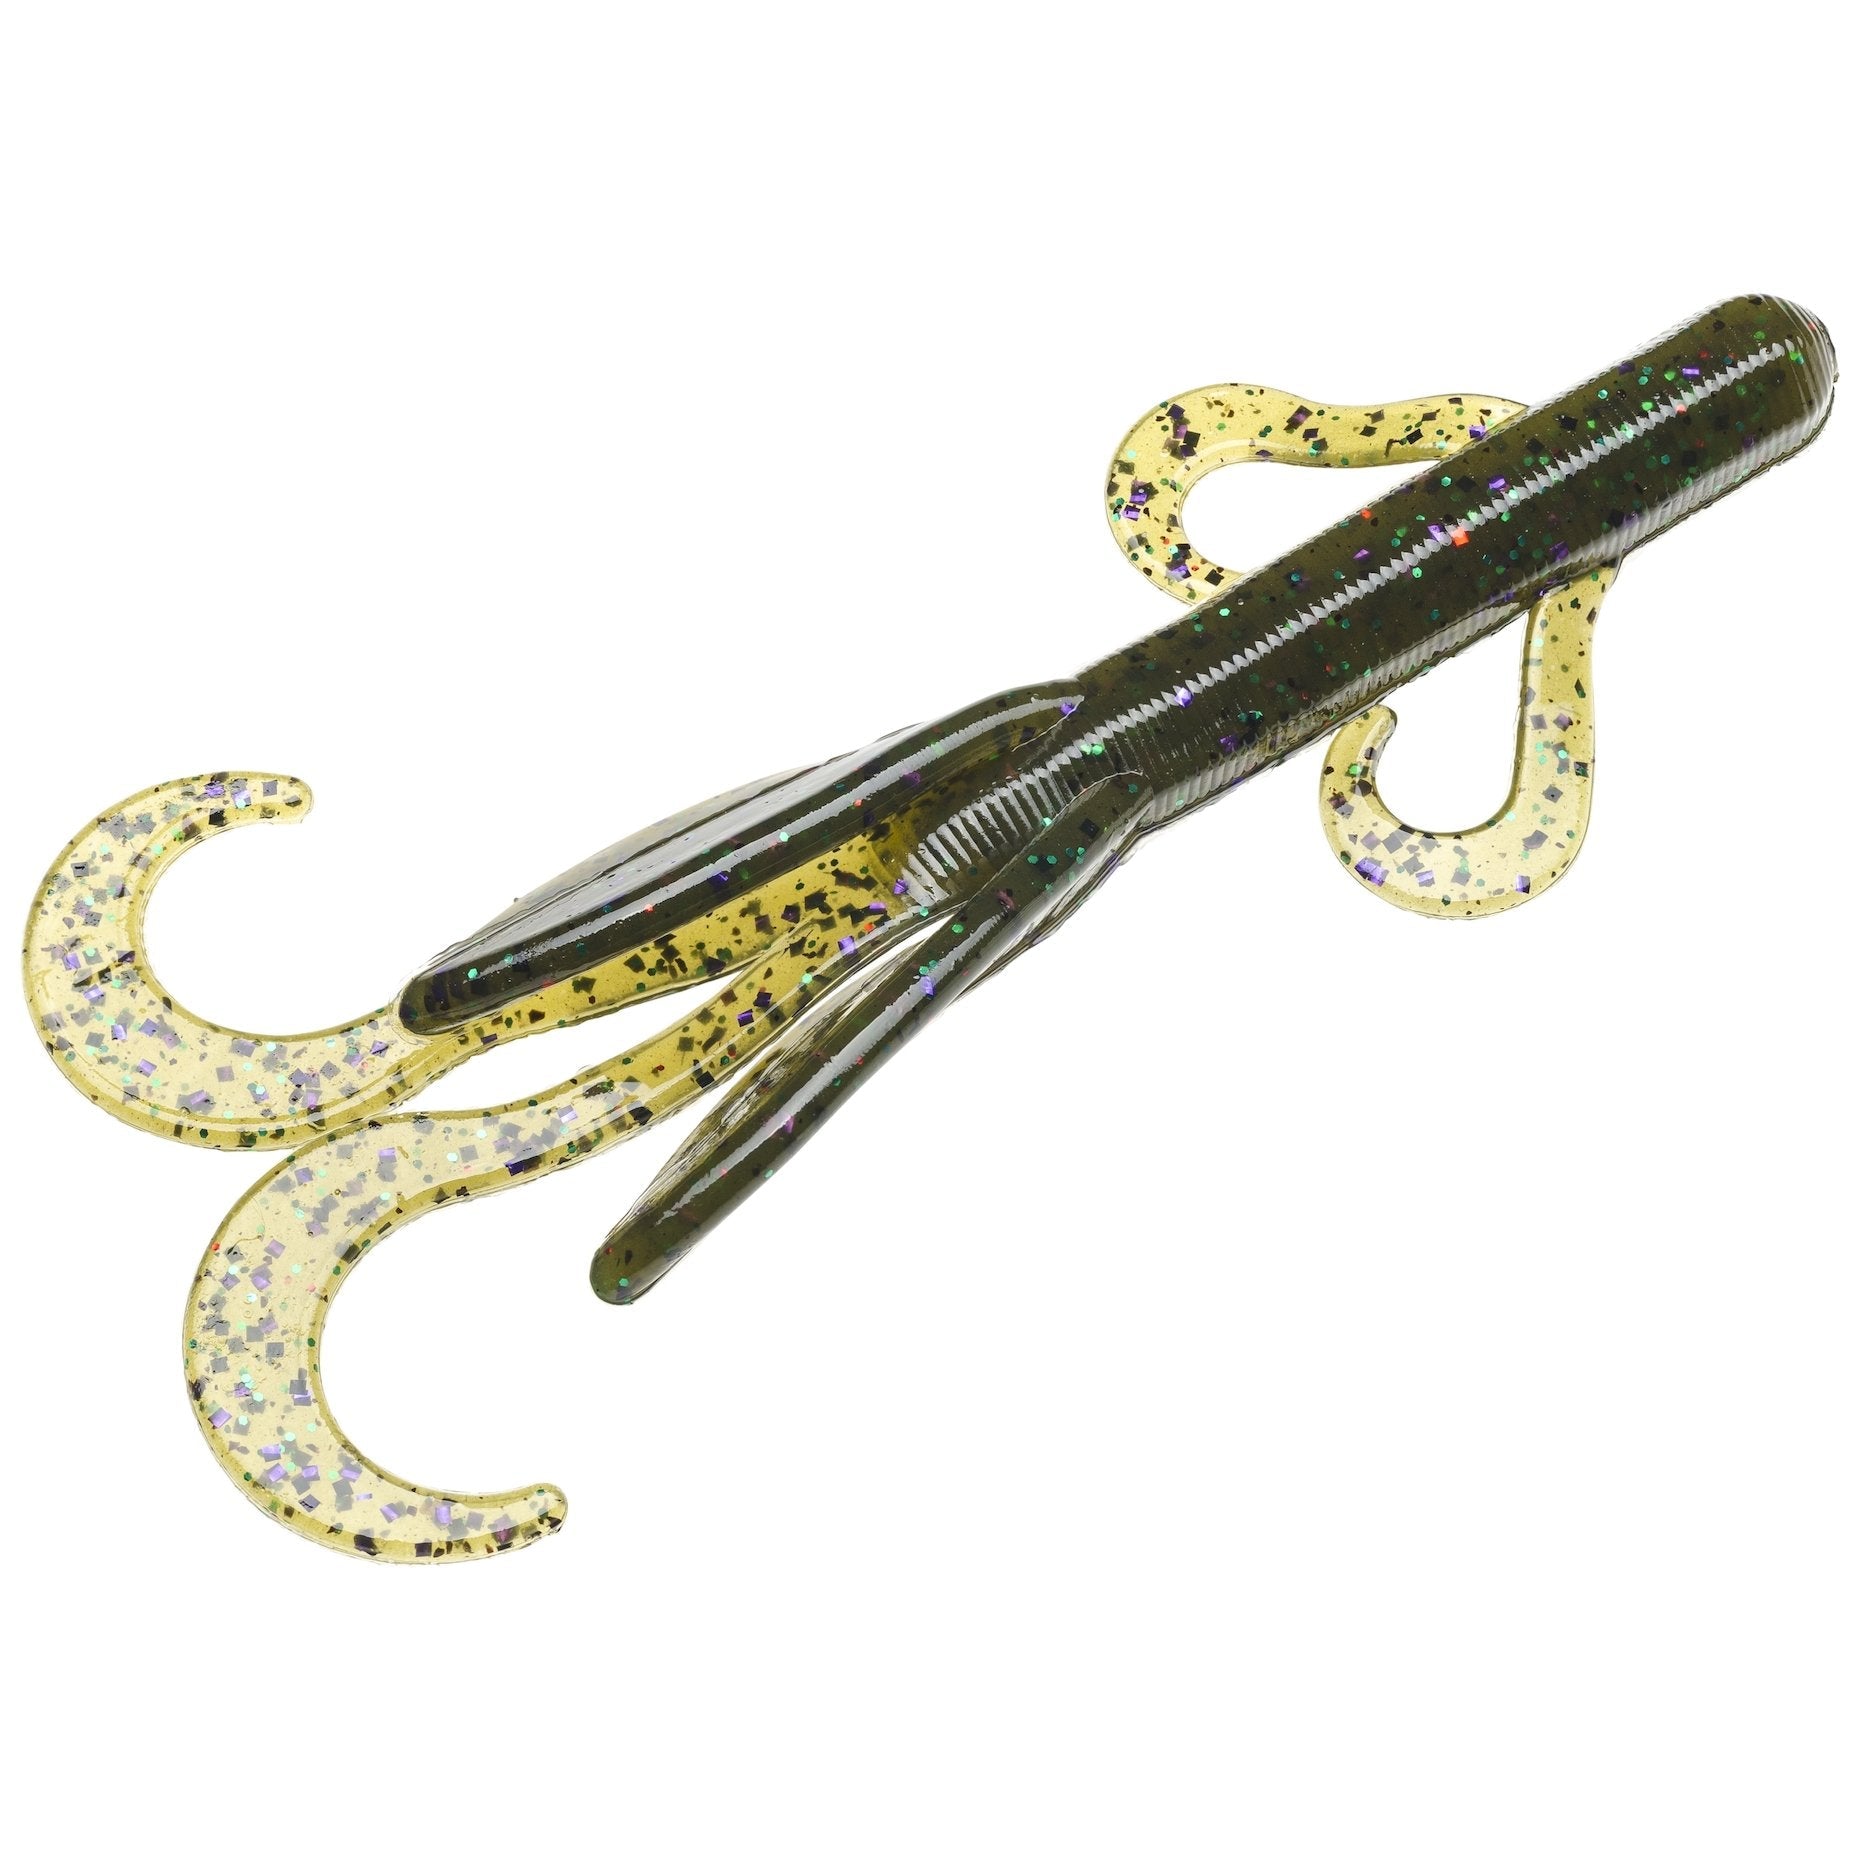 Strike King Game Hawg - Hamilton Bait and Tackle